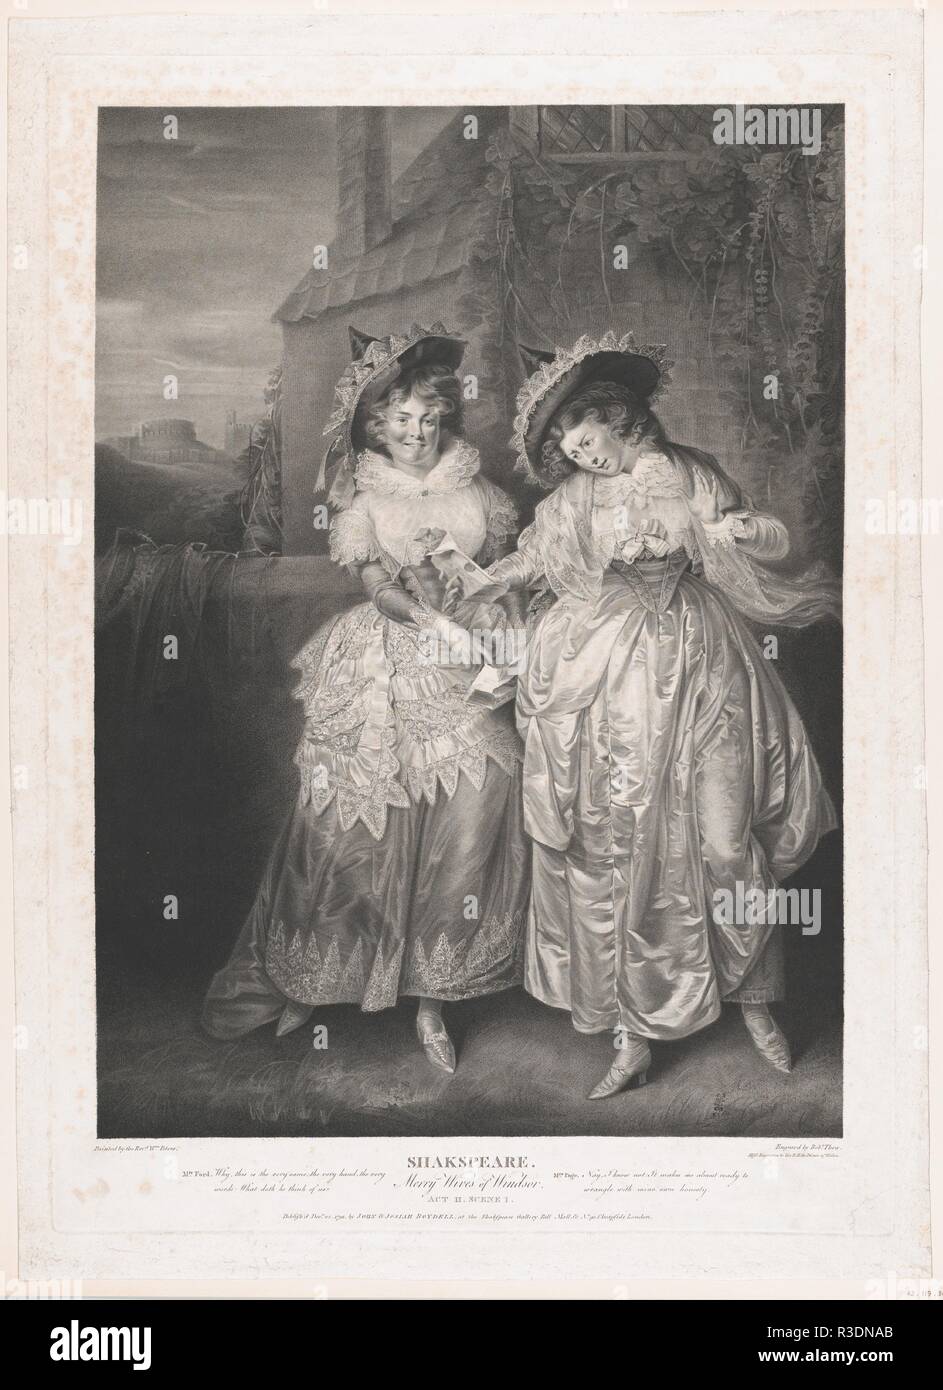 Mrs. Ford and Mrs Page (Shakespeare, Merry Wives of Windsor, Act 2, Scene 1). Artist: After Matthew William Peters (British, Freshwater, Isle of Wight 1742-1814 Brasted, Kent). Dimensions: Plate: 25 1/4 × 18 in. (64.2 × 45.7 cm)  Sheet: 27 1/16 × 19 1/2 in. (68.7 × 49.5 cm). Engraver: Robert Thew (British, Patrington 1758-1802 Stevenage). Publisher: John & Josiah Boydell (British, 1786-1804). Series/Portfolio: Boydell's Shakespeare Gallery. Subject: William Shakespeare (British, Stratford-upon-Avon 1564-1616 Stratford-upon-Avon). Date: 1793. Museum: Metropolitan Museum of Art, New York, USA. A Stock Photo